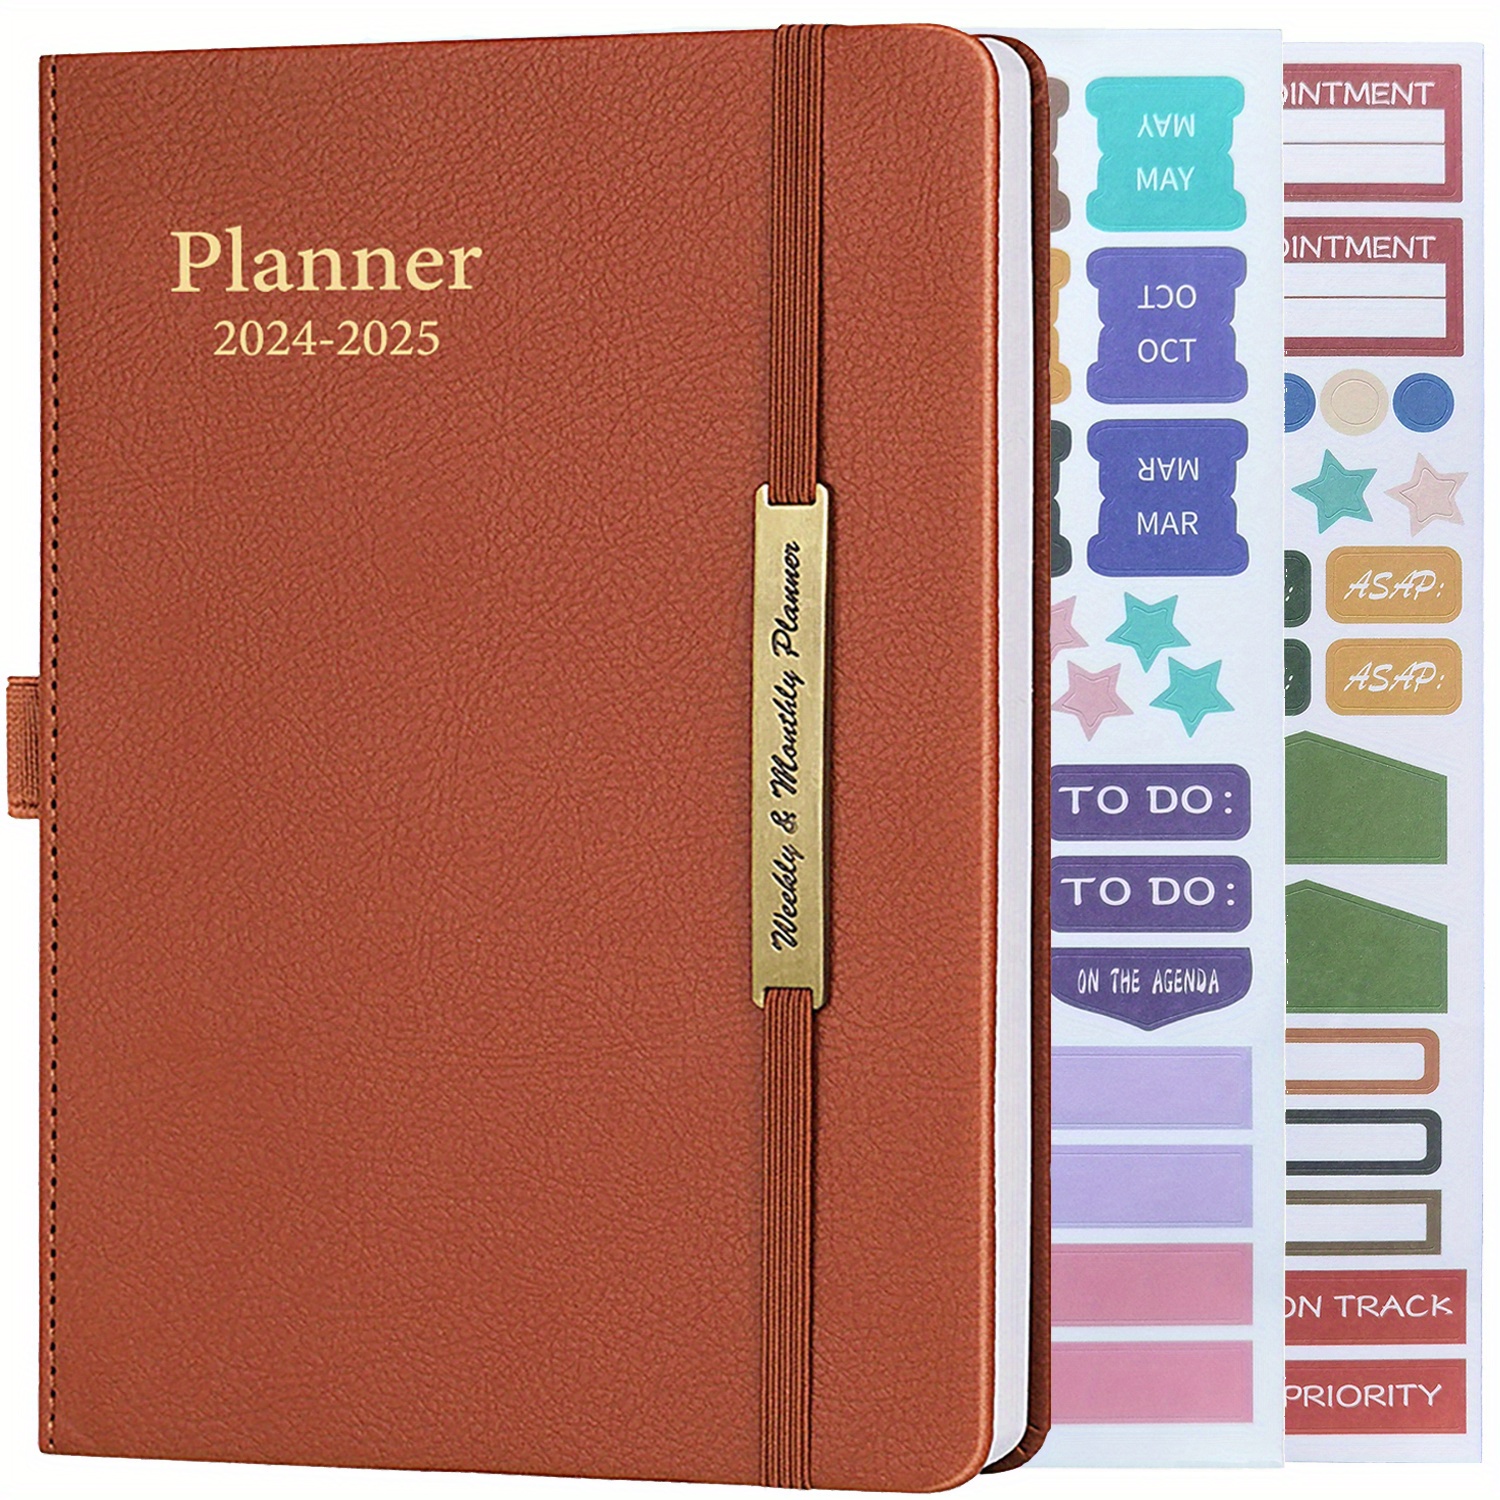 2024-2025 Planner 18 Months Weekly & Monthly Planners, Academic Year  Calendar ( January 2024 - June 2025 ) Agenda Notebook With Stickers, Inner  Pocket